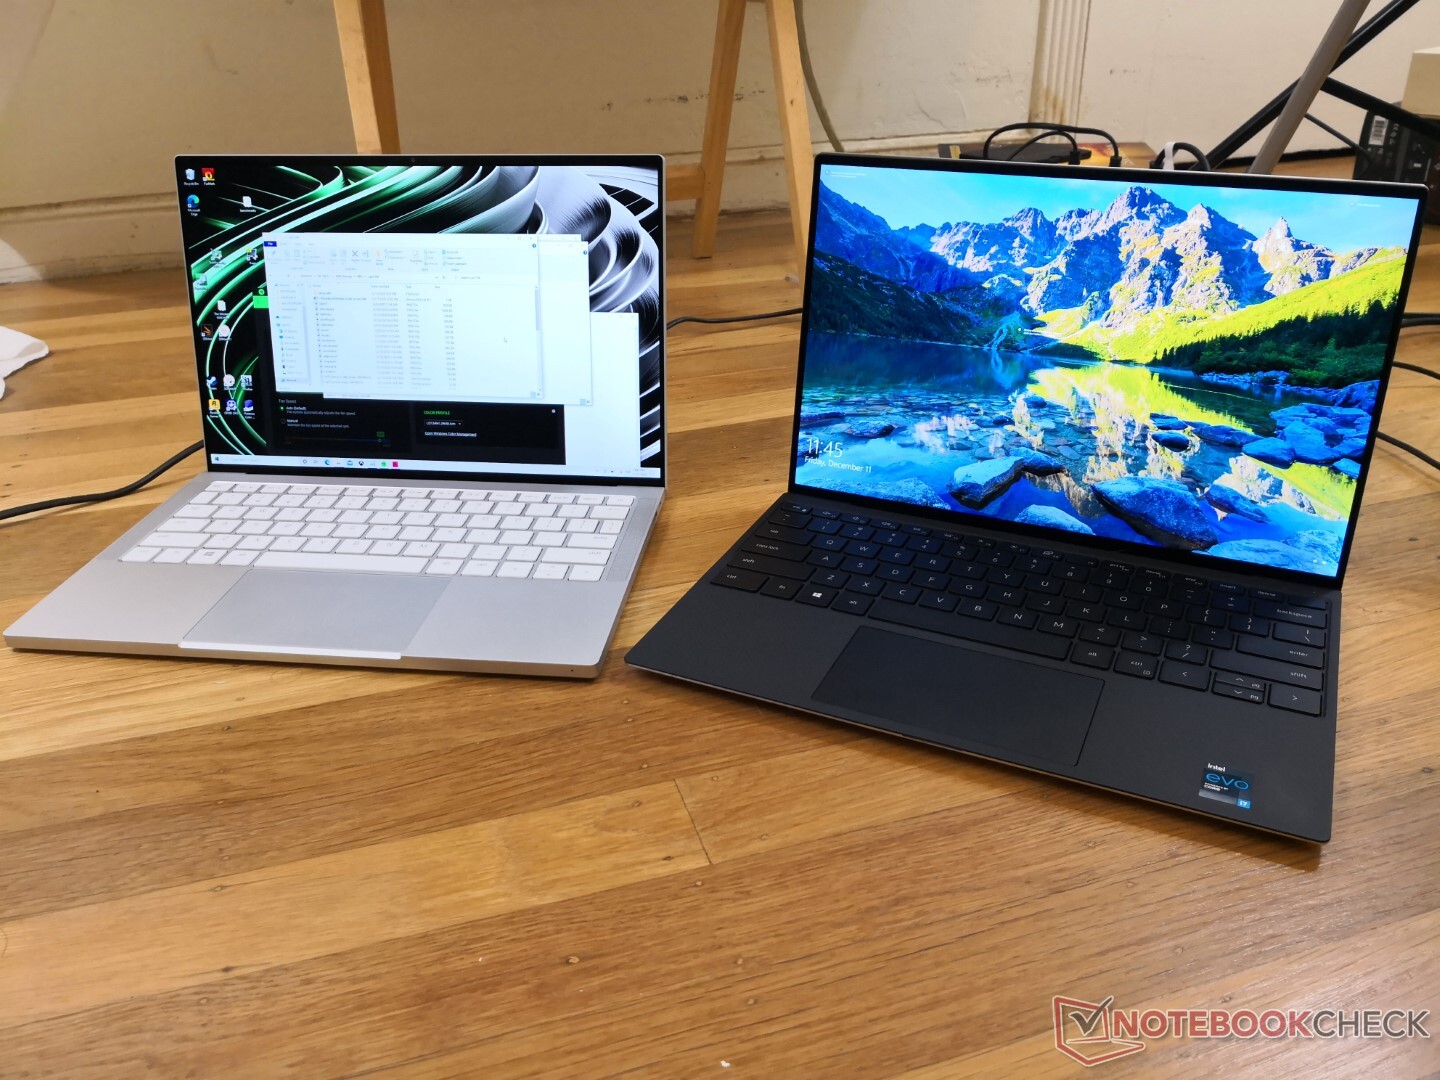 Dell XPS 13 vs. XPS 15 vs. XPS 17: Which laptop is best for you